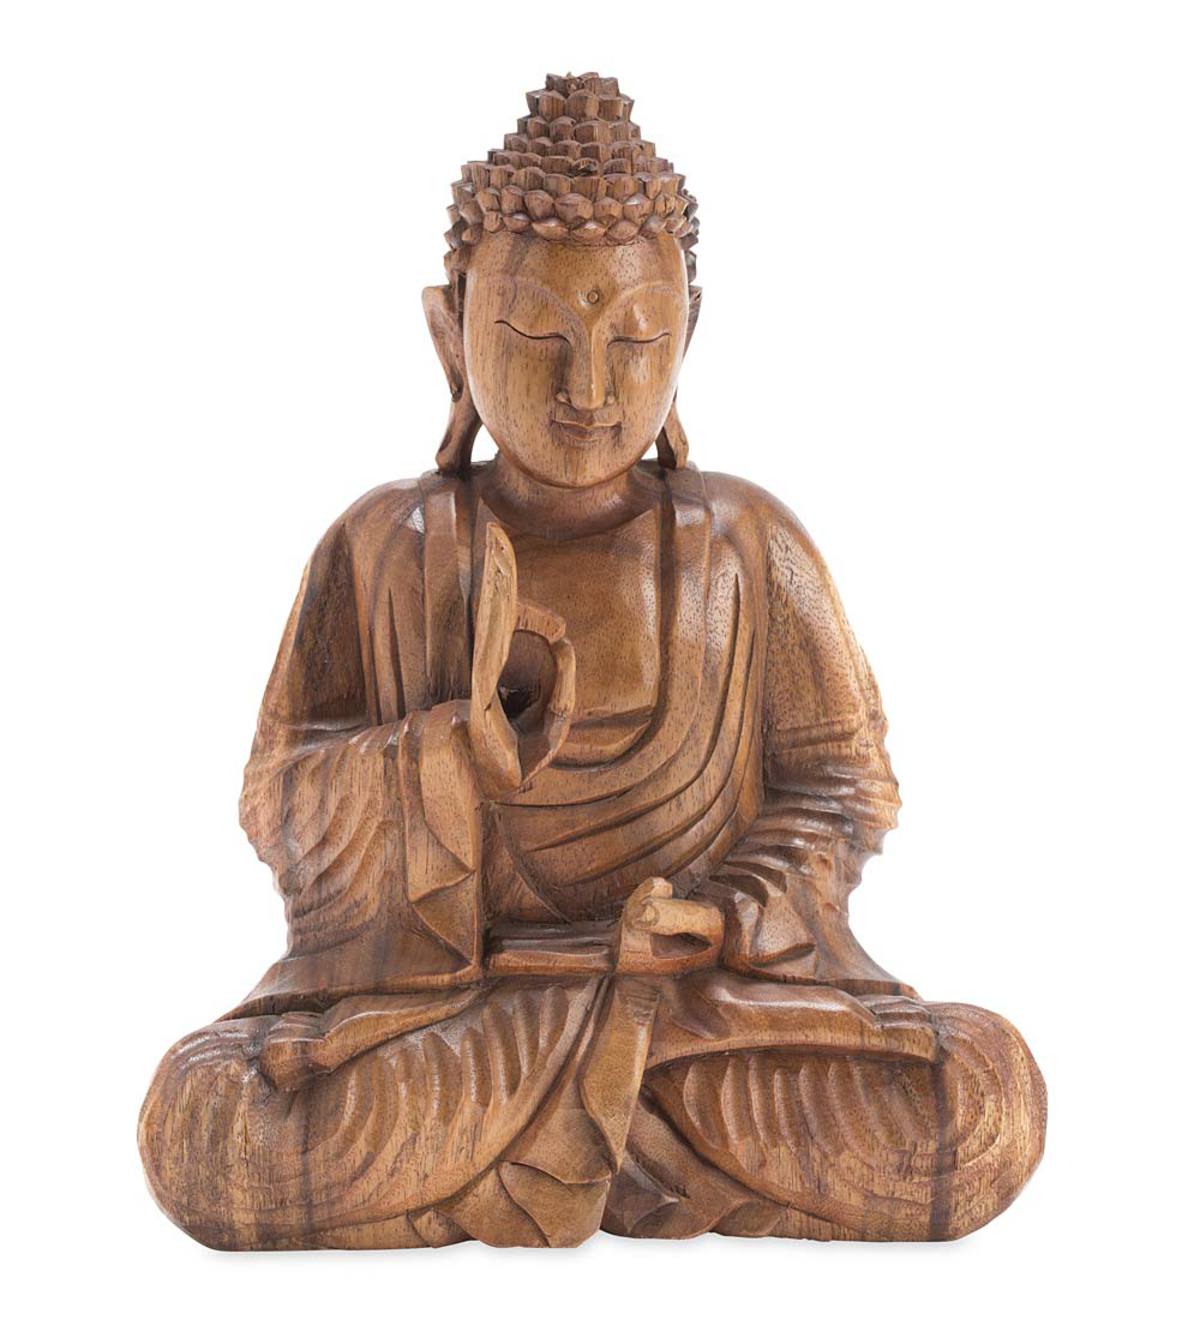 Hand-Carved Seated Wooden Buddha